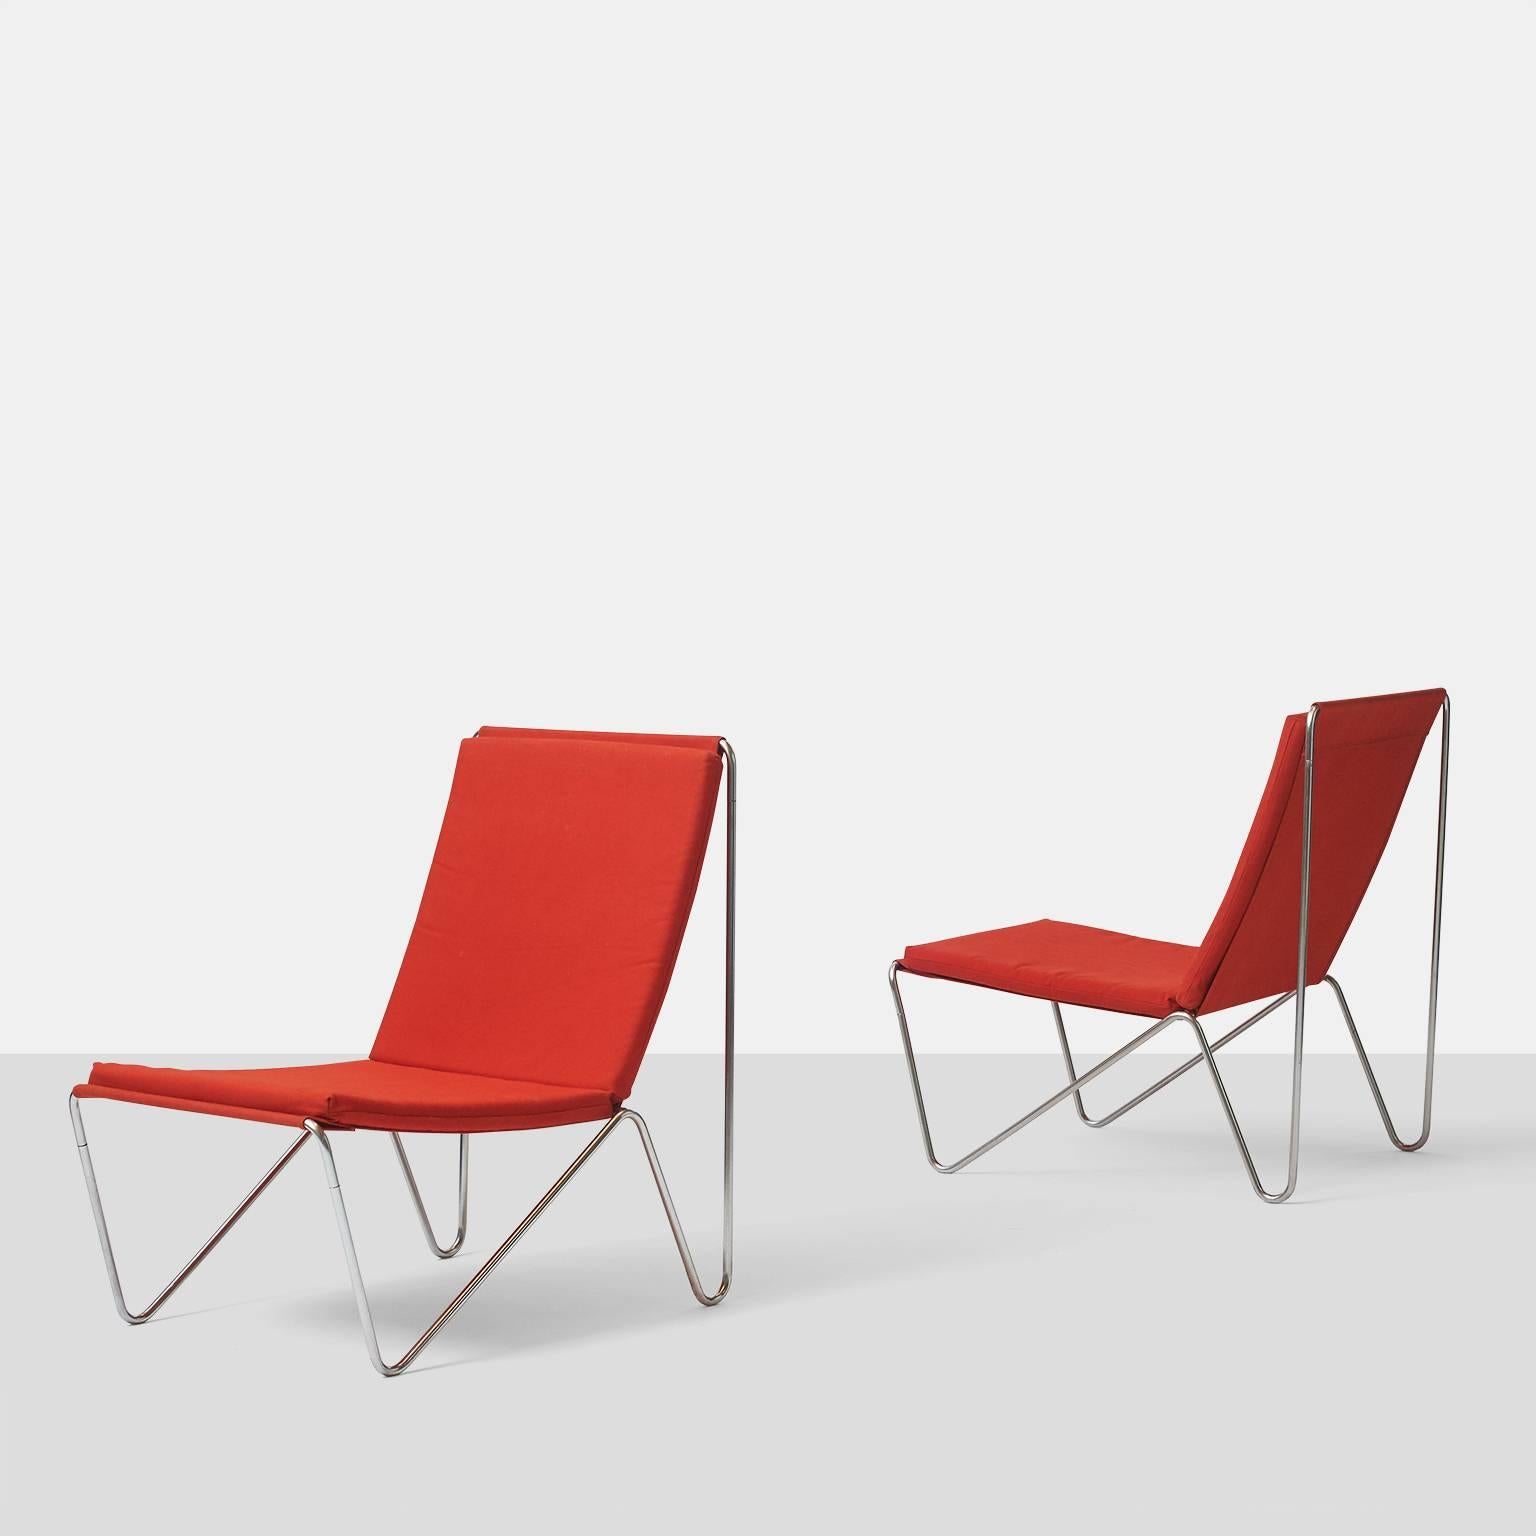 A pair of Bachelor chairs designed by Verner Panton in 1955 and produced by Fritz Hansen. The frame is made of tubular steel and mounted with red canvas and loose seat and back cushions.